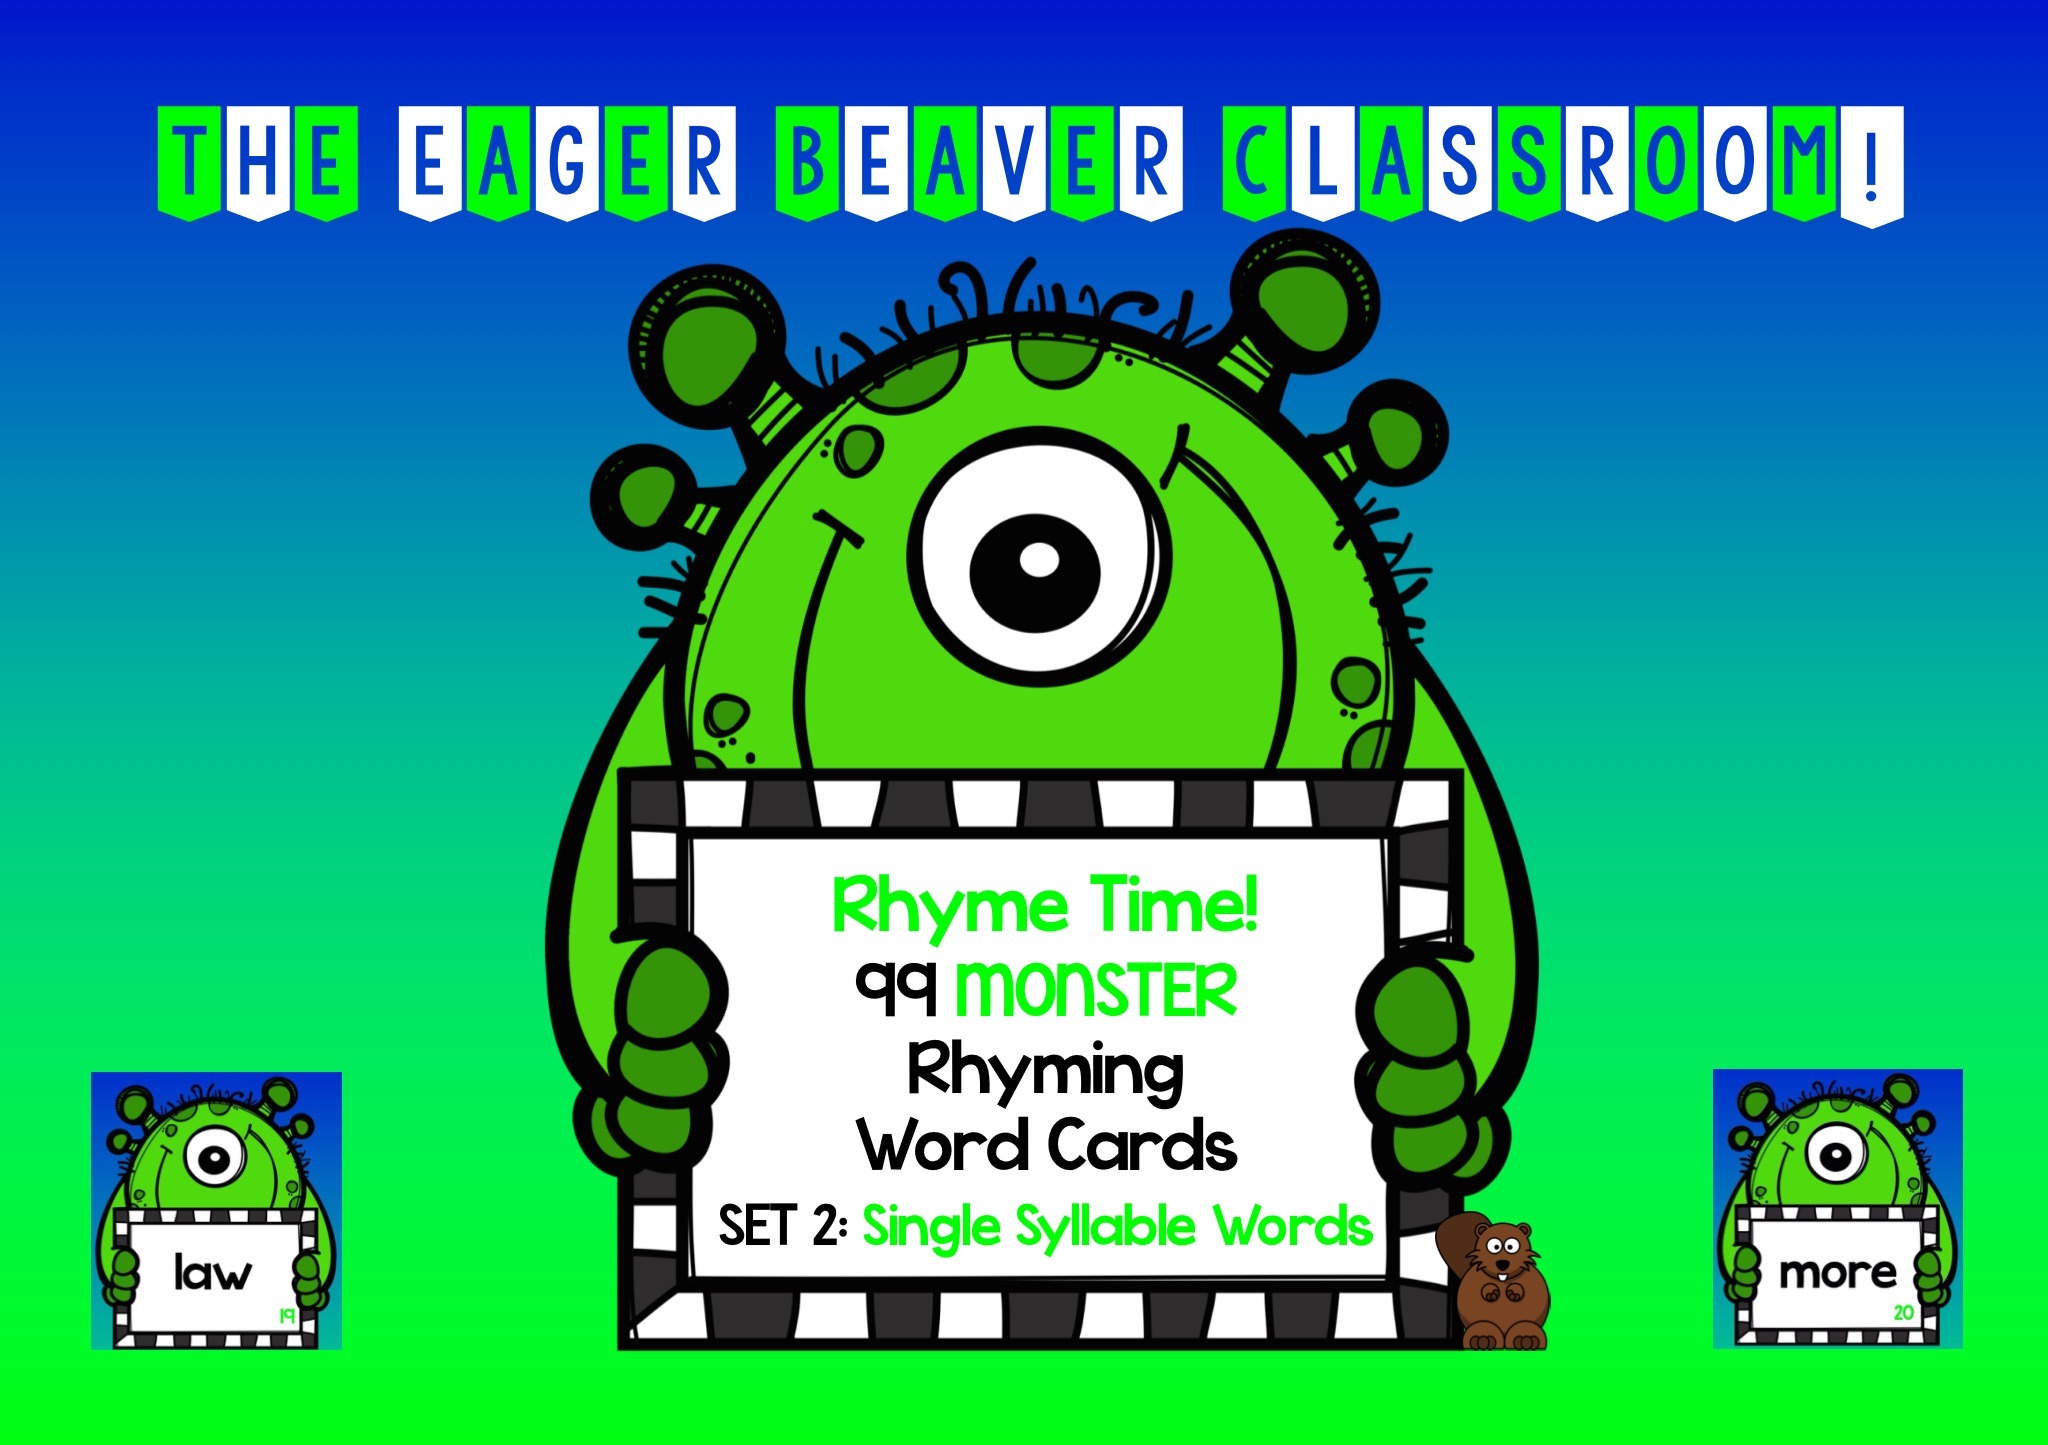 Monster Rhyme Time! 99 Monster Rhyming Cards, Single-syllable Words, Set 2